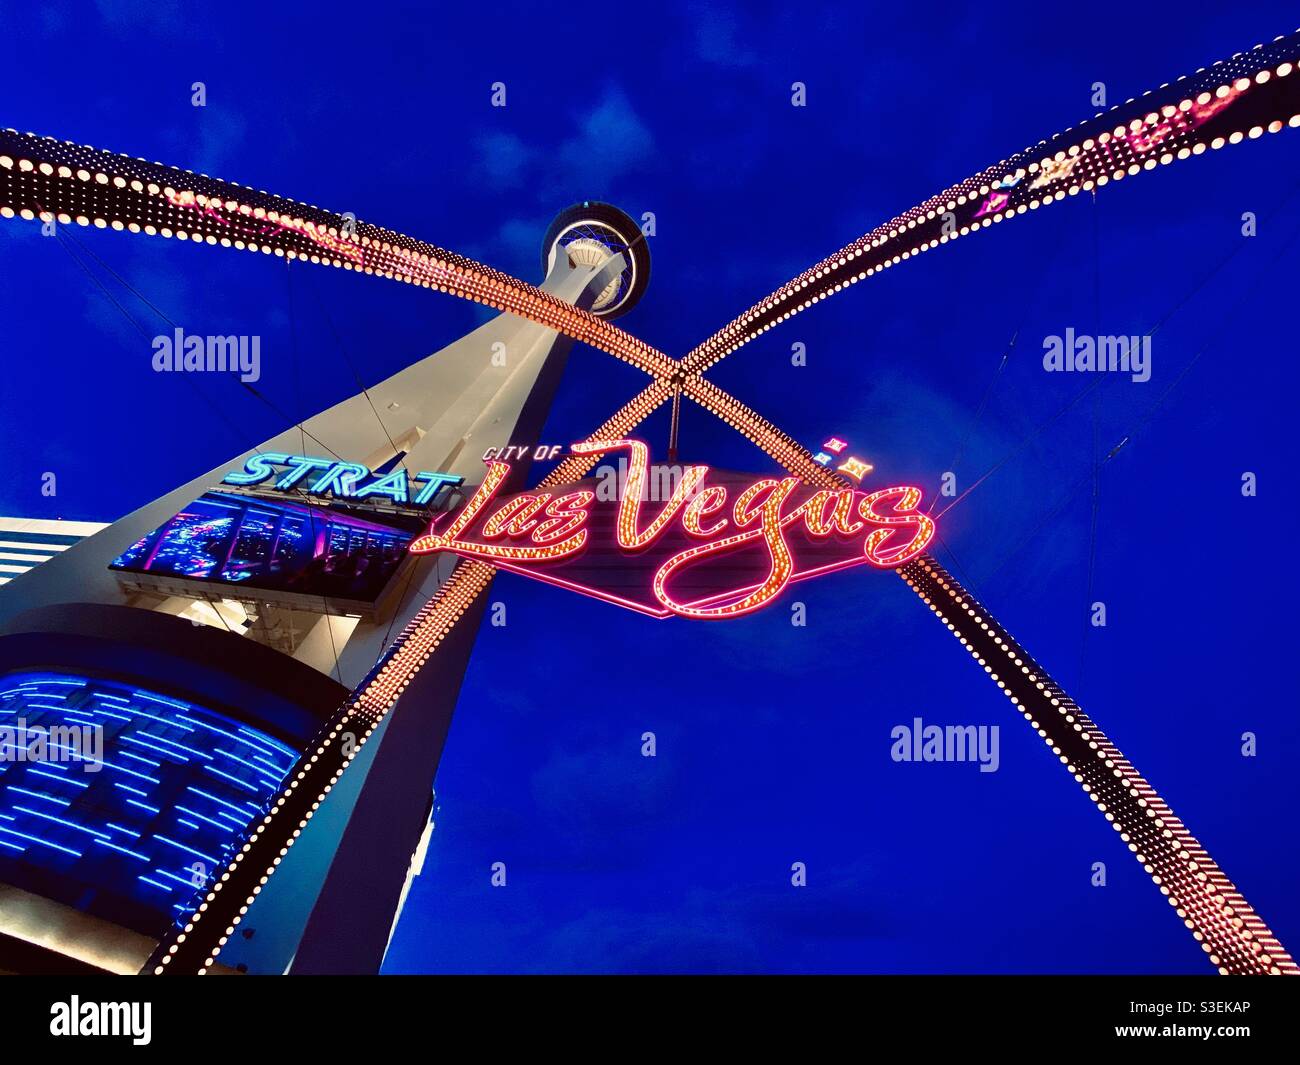 Welcoming sign/arch with the iconic tower of the Stratosphere in Las Vegas,  Nevada Stock Photo - Alamy